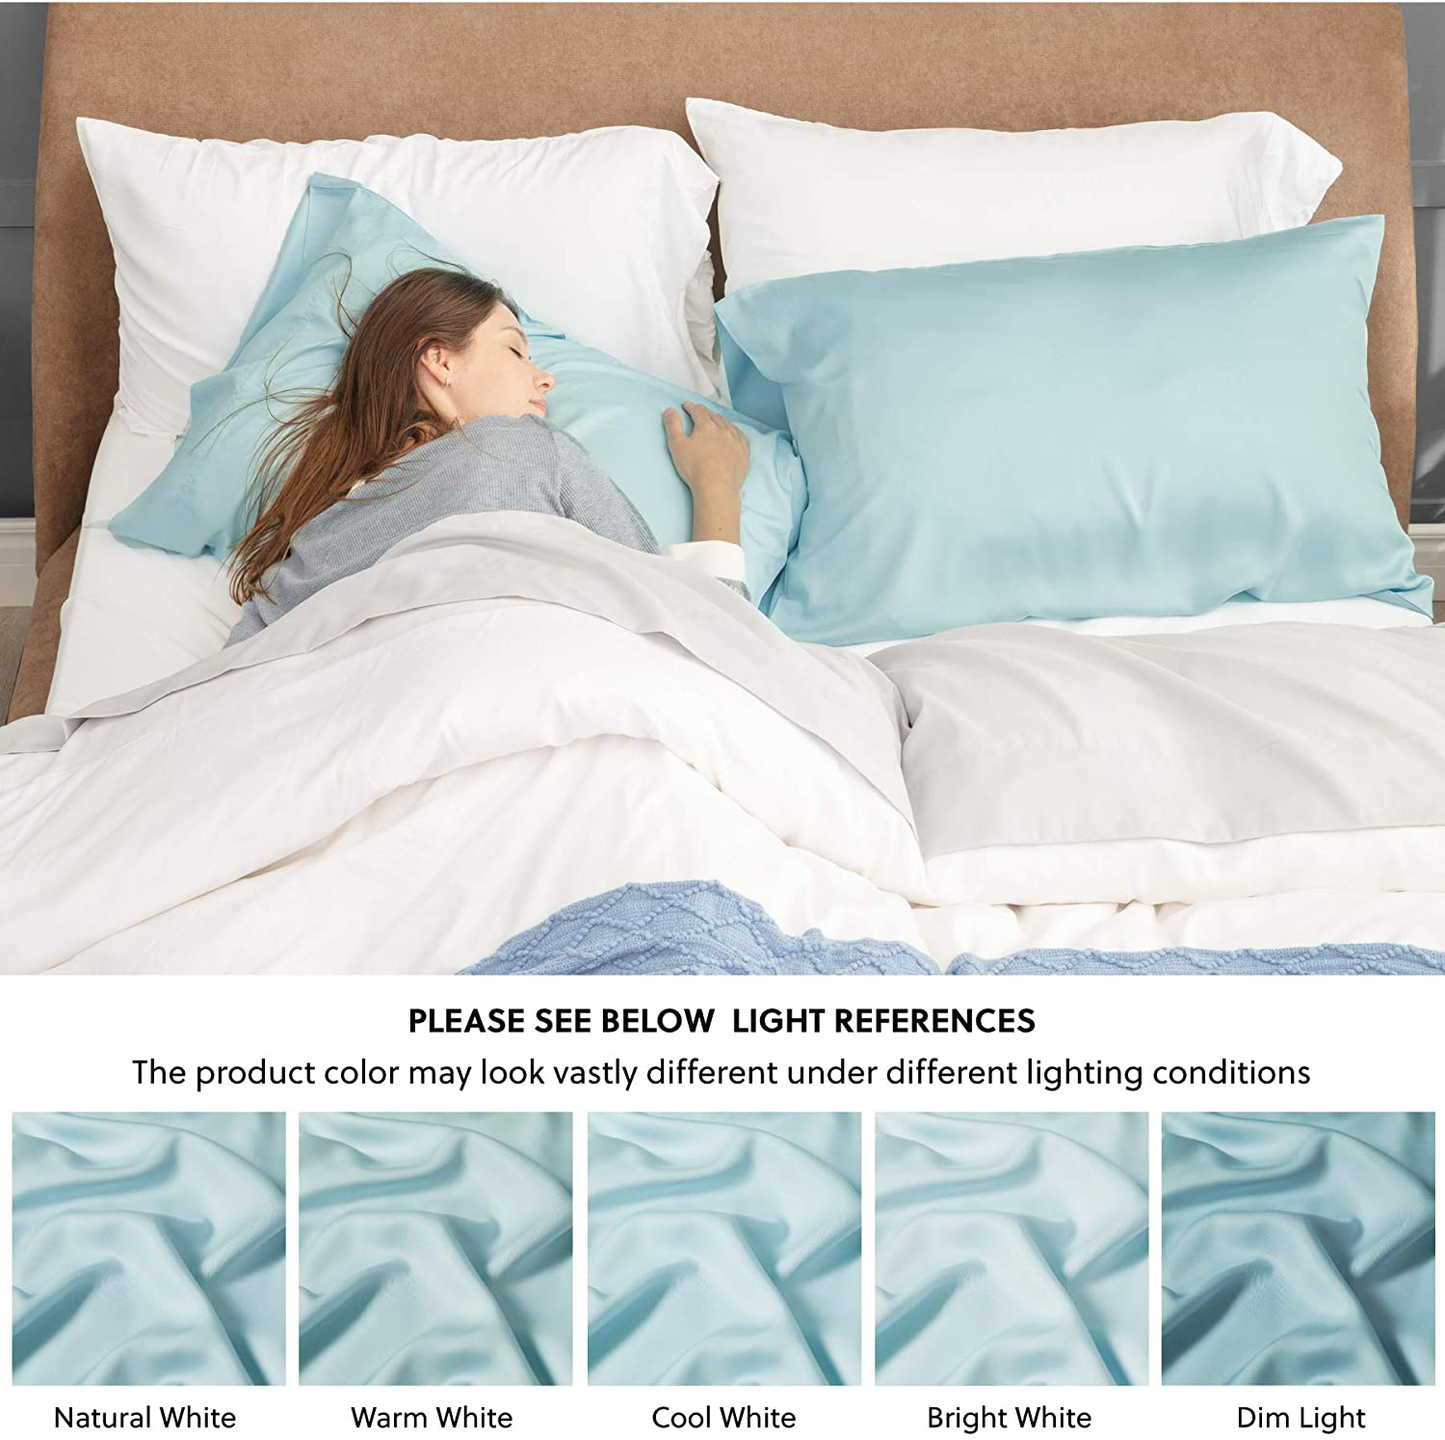 Bedsure Bamboo Pillow Cases for Kids Standard Size Set of 2 - Aqua Blue Cooling Pillowcases 2 Pack with Envelope Closure, Cool and Breathable Pillow Case, 20x26 inches